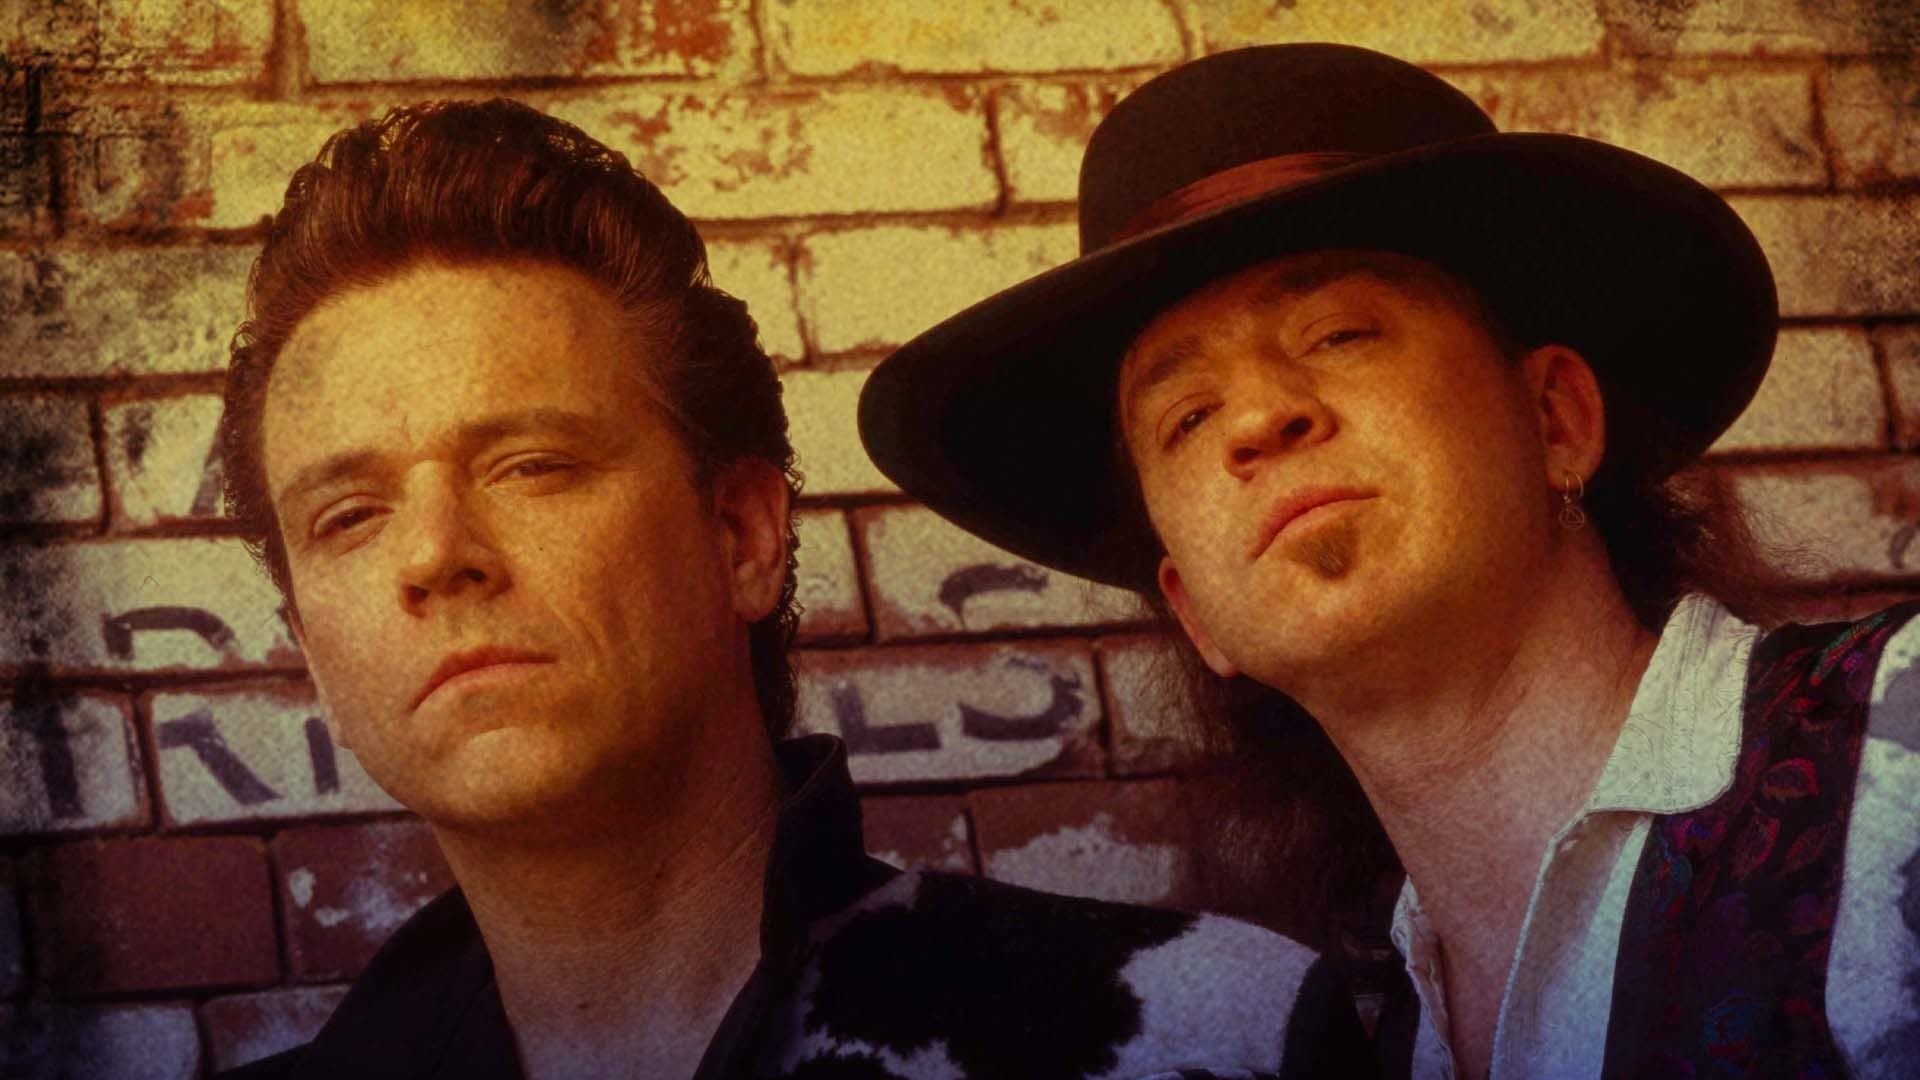 Jimmie and Stevie Ray Vaughan: Brothers in Blues background